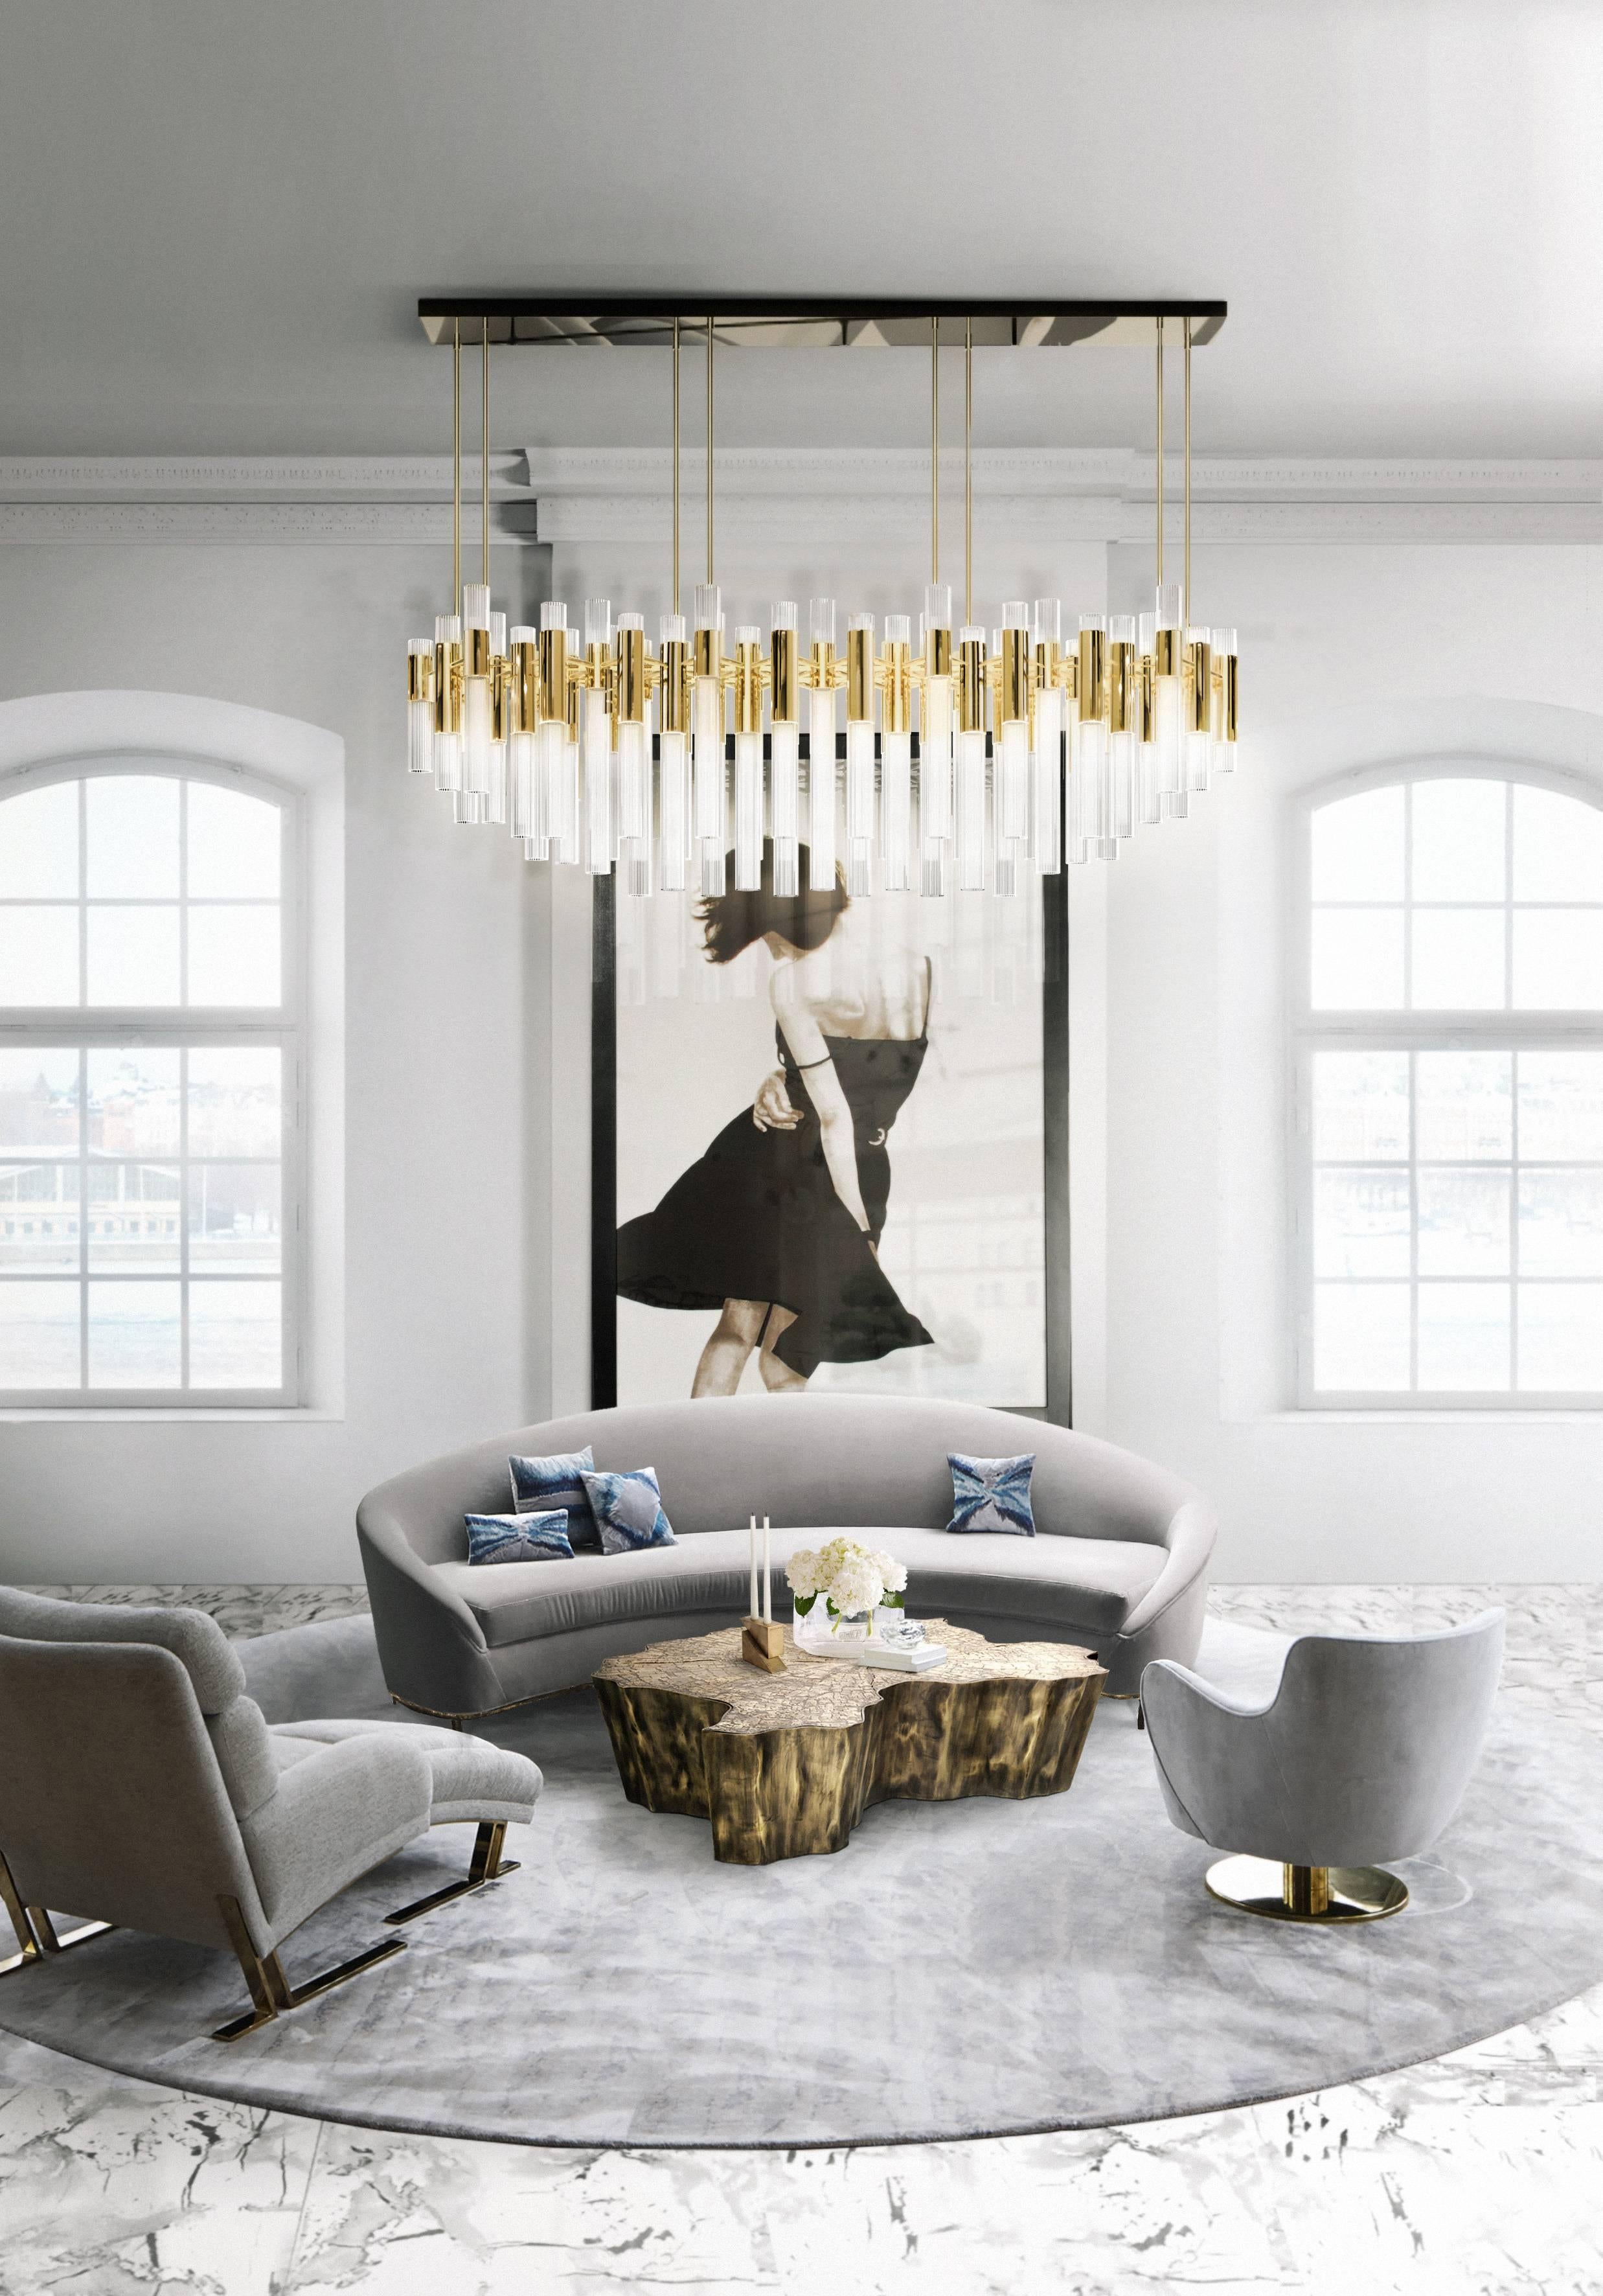 Everything sparkles under this elegant chandelier. This masterpiece made with gold plated brass combined with ribbed fine tubes of crystal glass brings a natural feeling of waterfalls to any space. The glamorous sensation of water in the tubes is